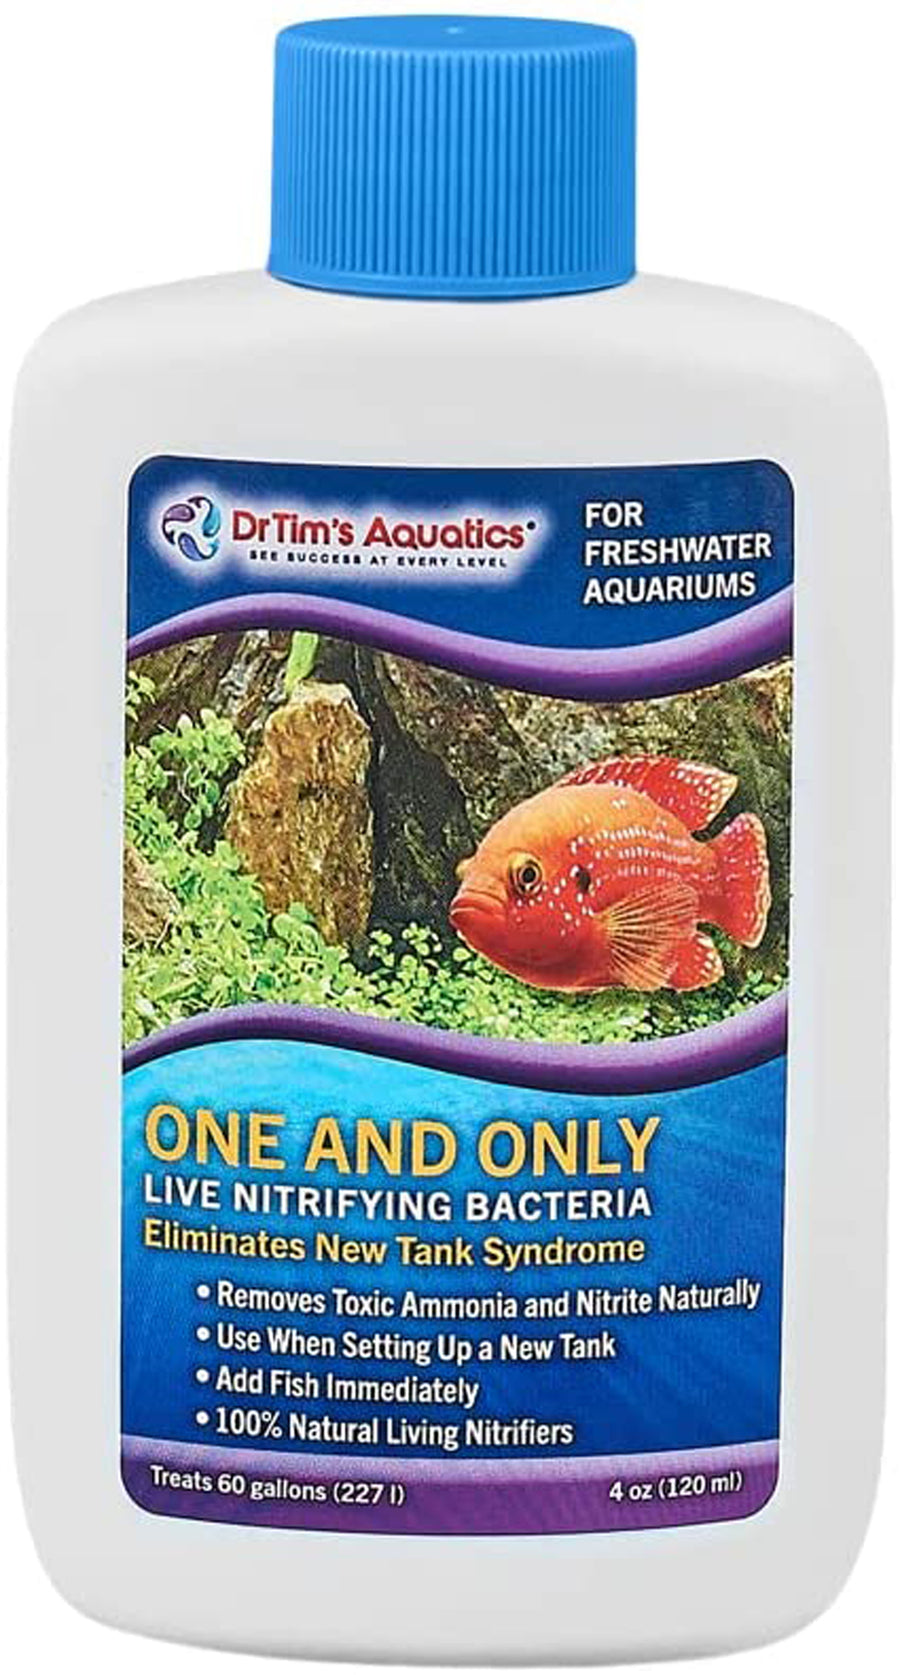 Dr. Tims Aquatics One and Only Live Nitrifying Bacteria for Freshwater Aquariums 4 fl. oz